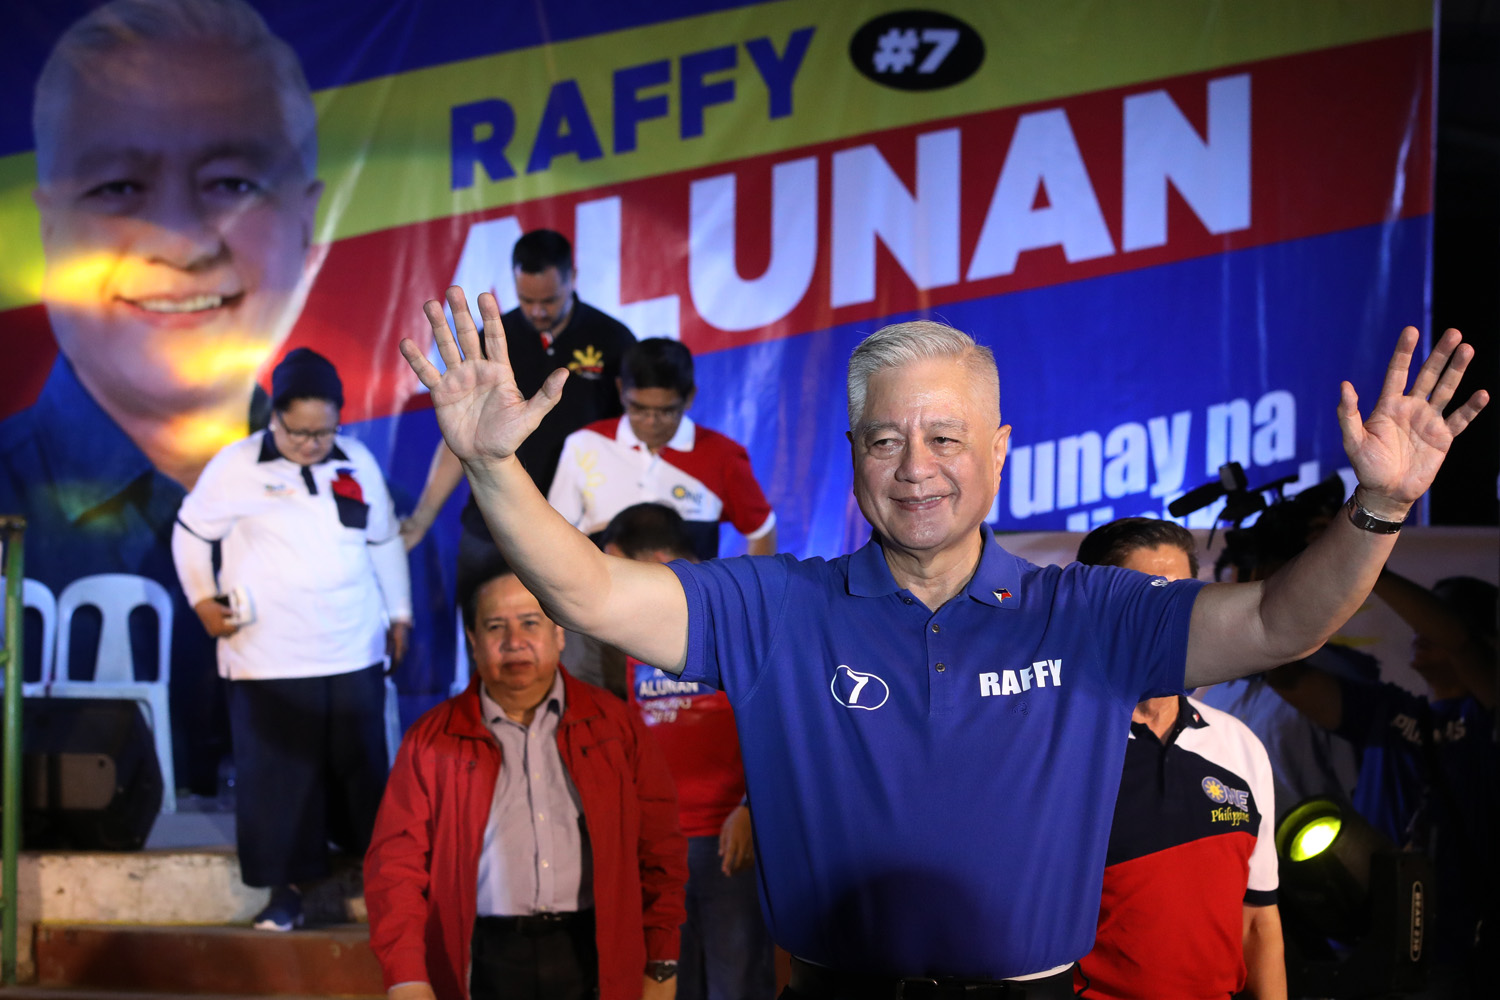 12TH MAN. File photo of former DILG Secretary Raffy Alunan during the launch of the Bagumbayan candidates. Photo by Darren Langit/Rappler   